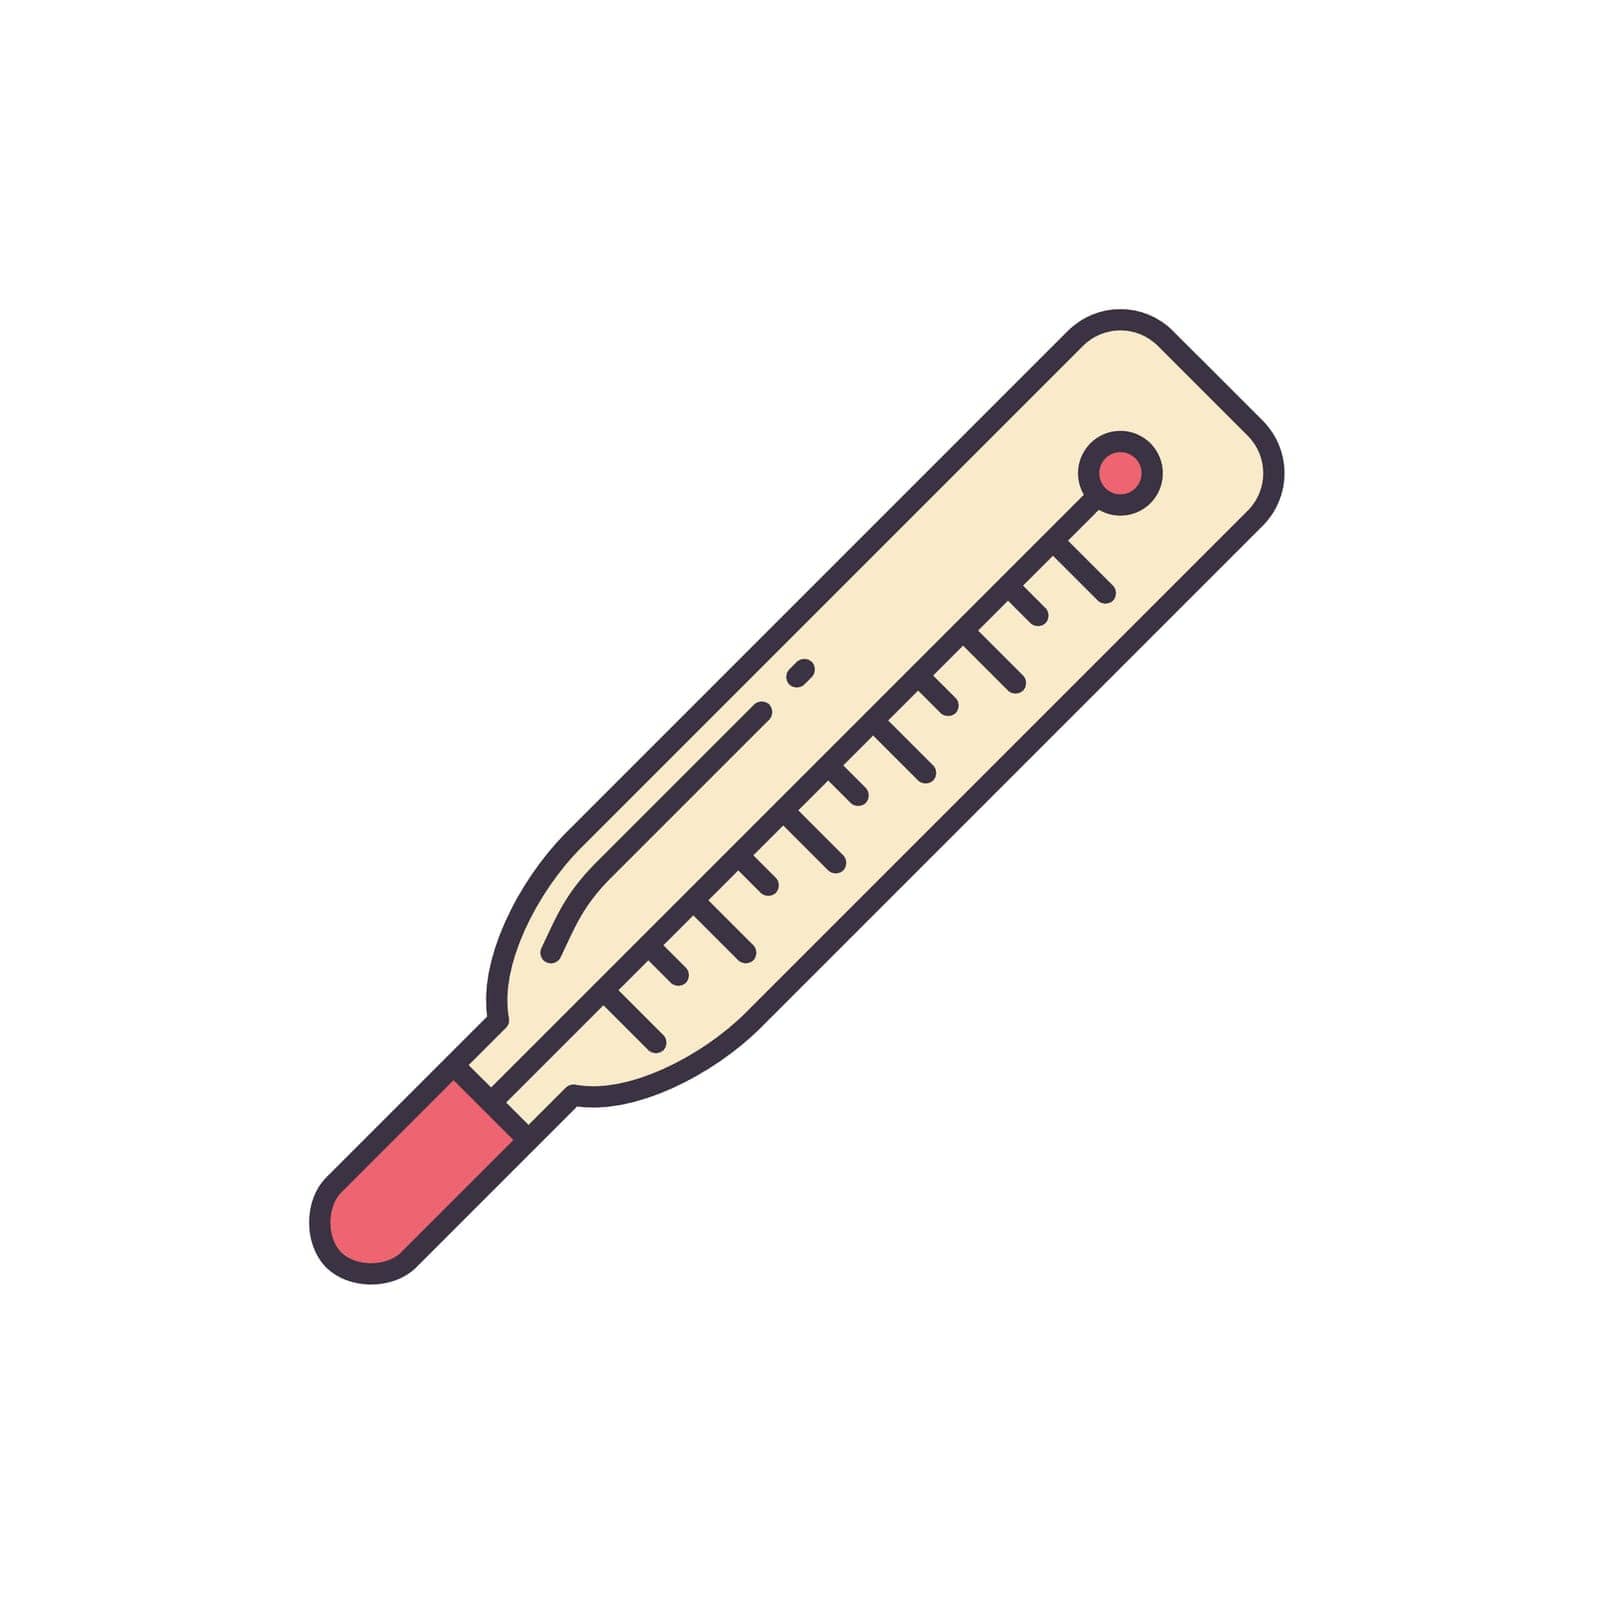 Medical Thermometer related vector line icon. Isolated on white background. Vector illustration. Editable stroke